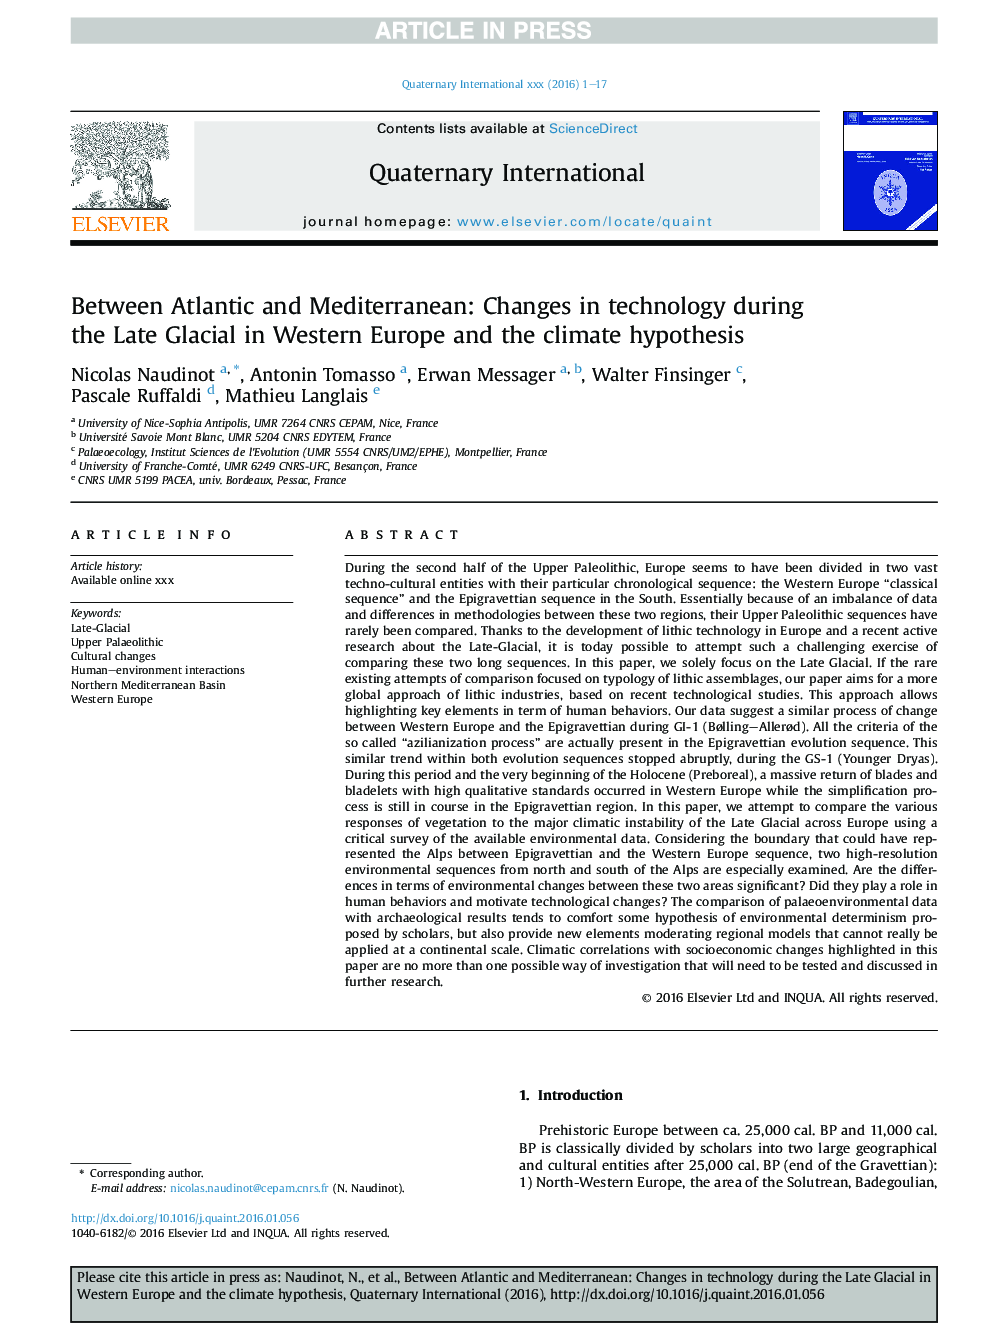 Between Atlantic and Mediterranean: Changes in technology during the Late Glacial in Western Europe and the climate hypothesis